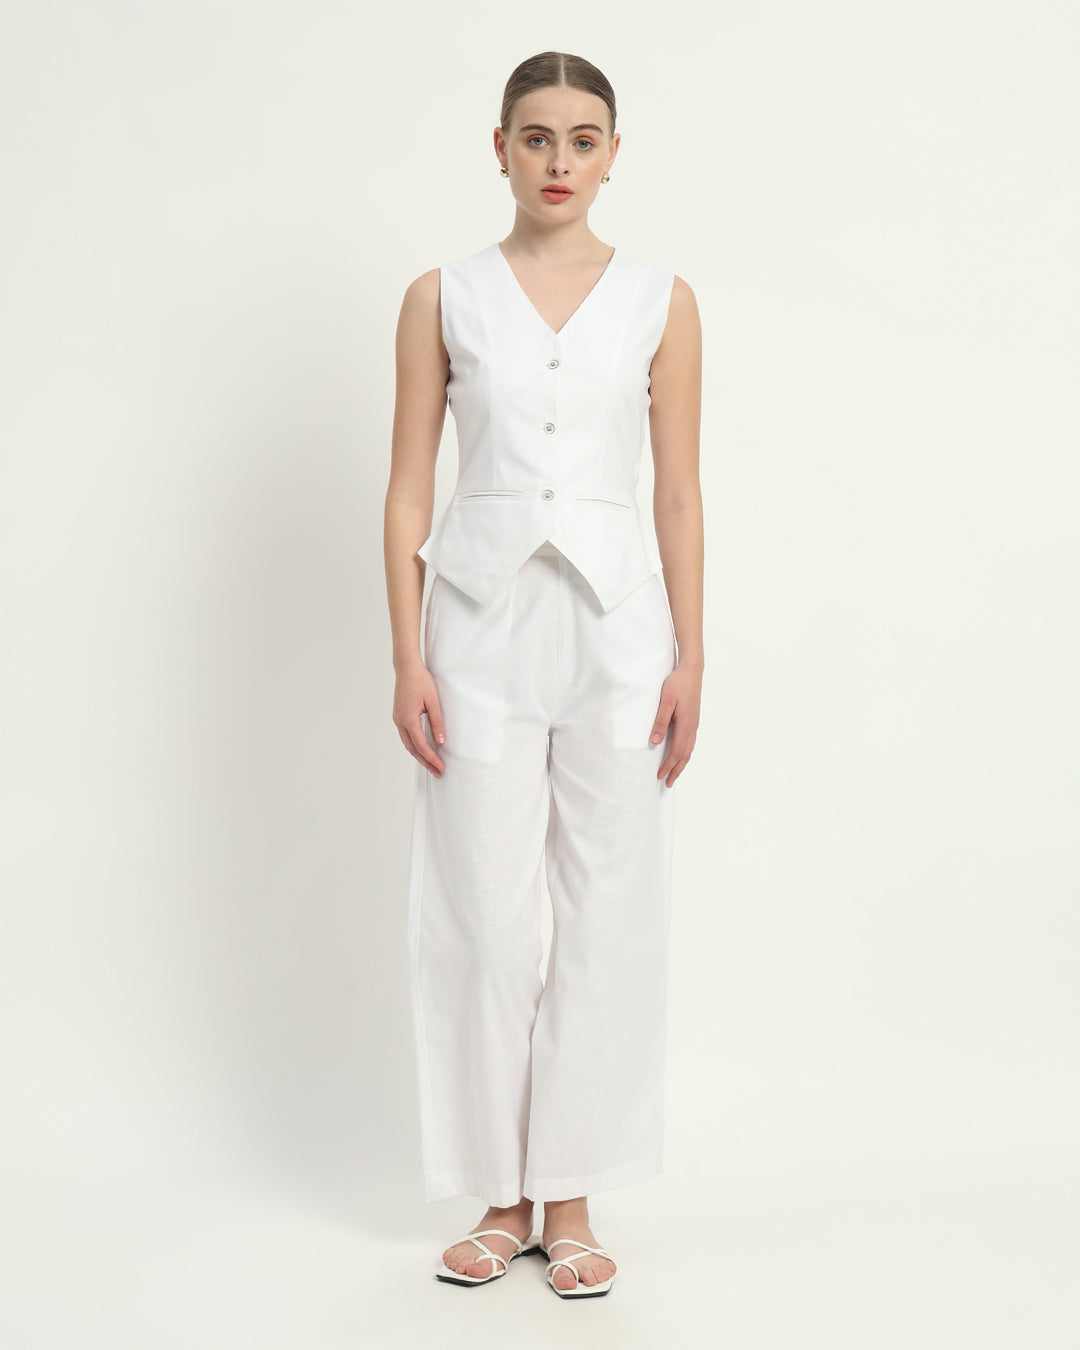 Downtown Diva Vest White Linen Top (Without Bottoms)